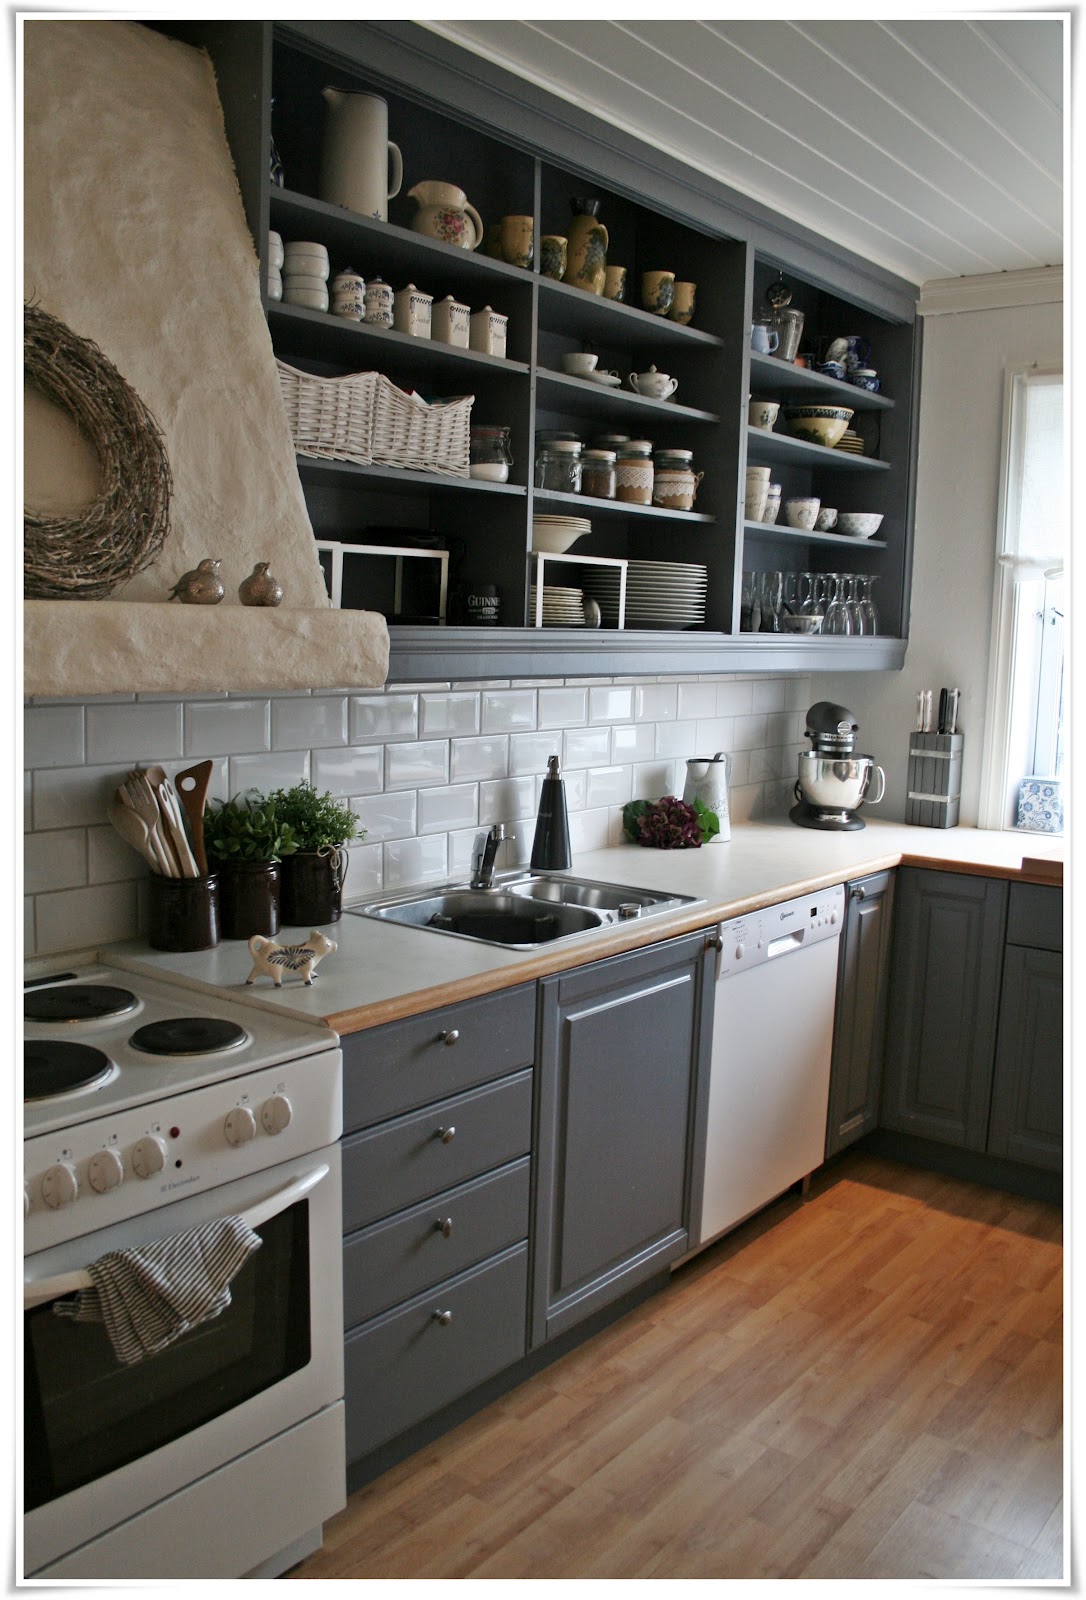  kitchens with open shelving ideas